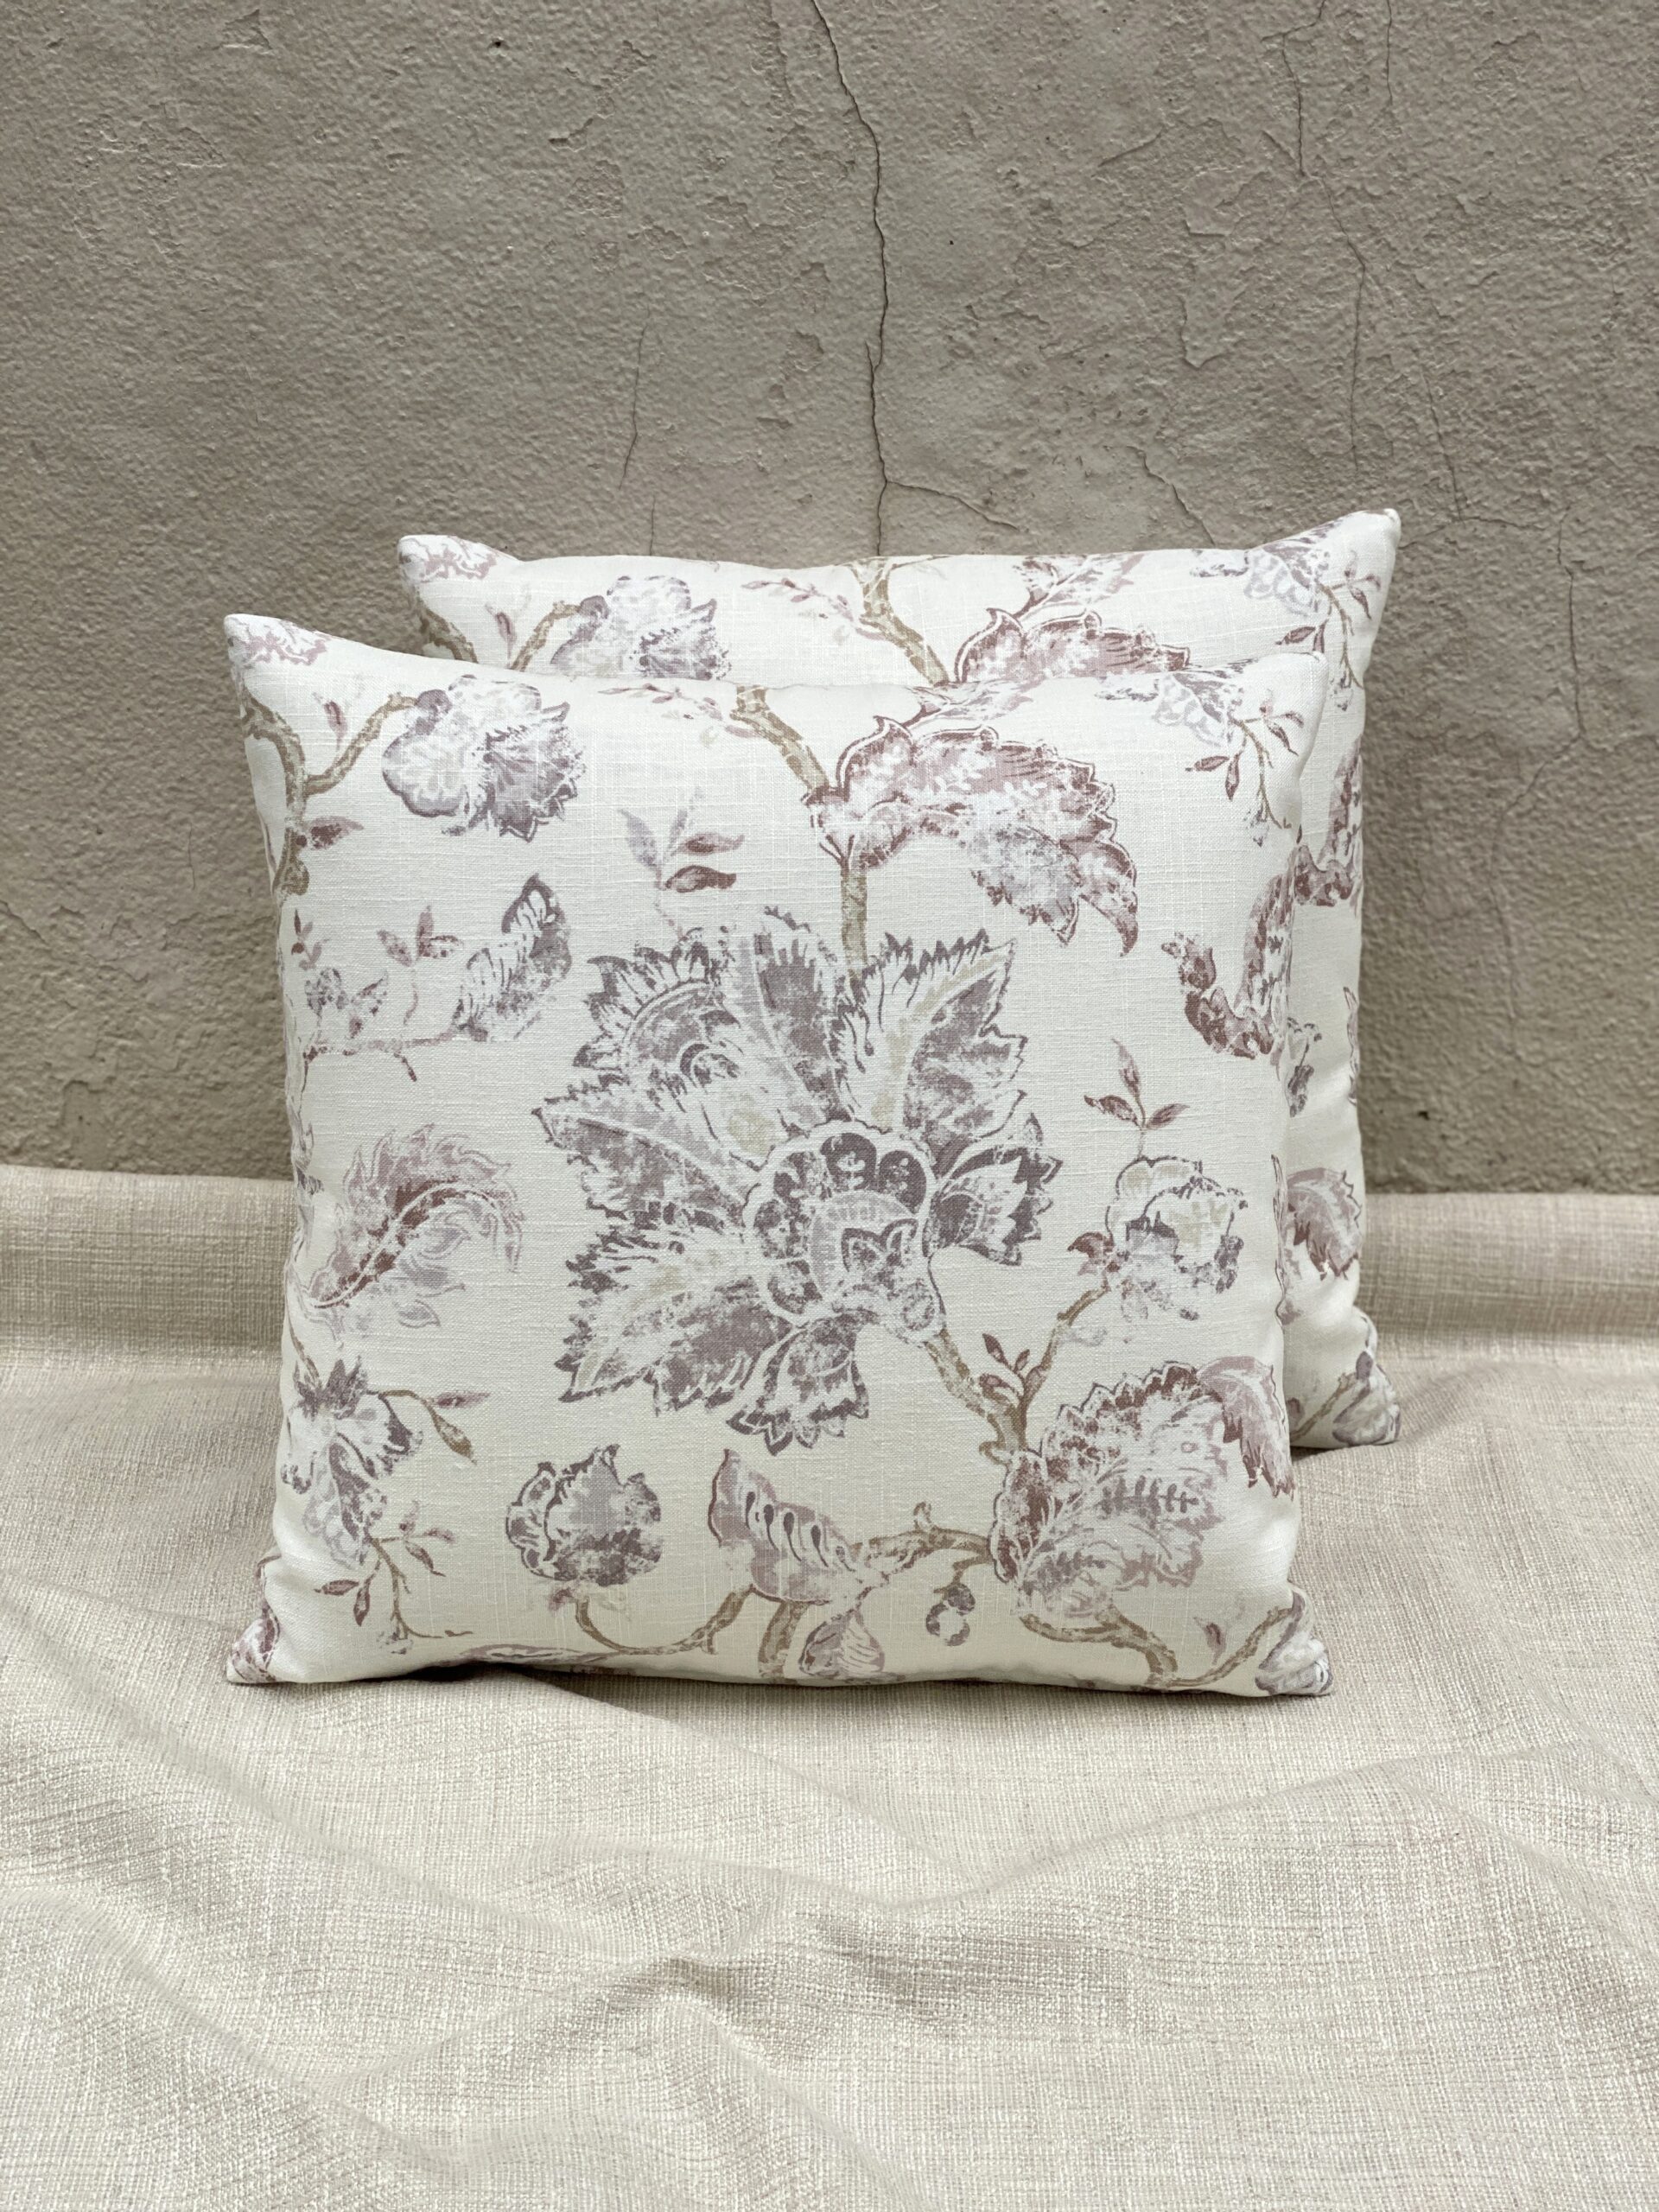 Trend Floral Pillows